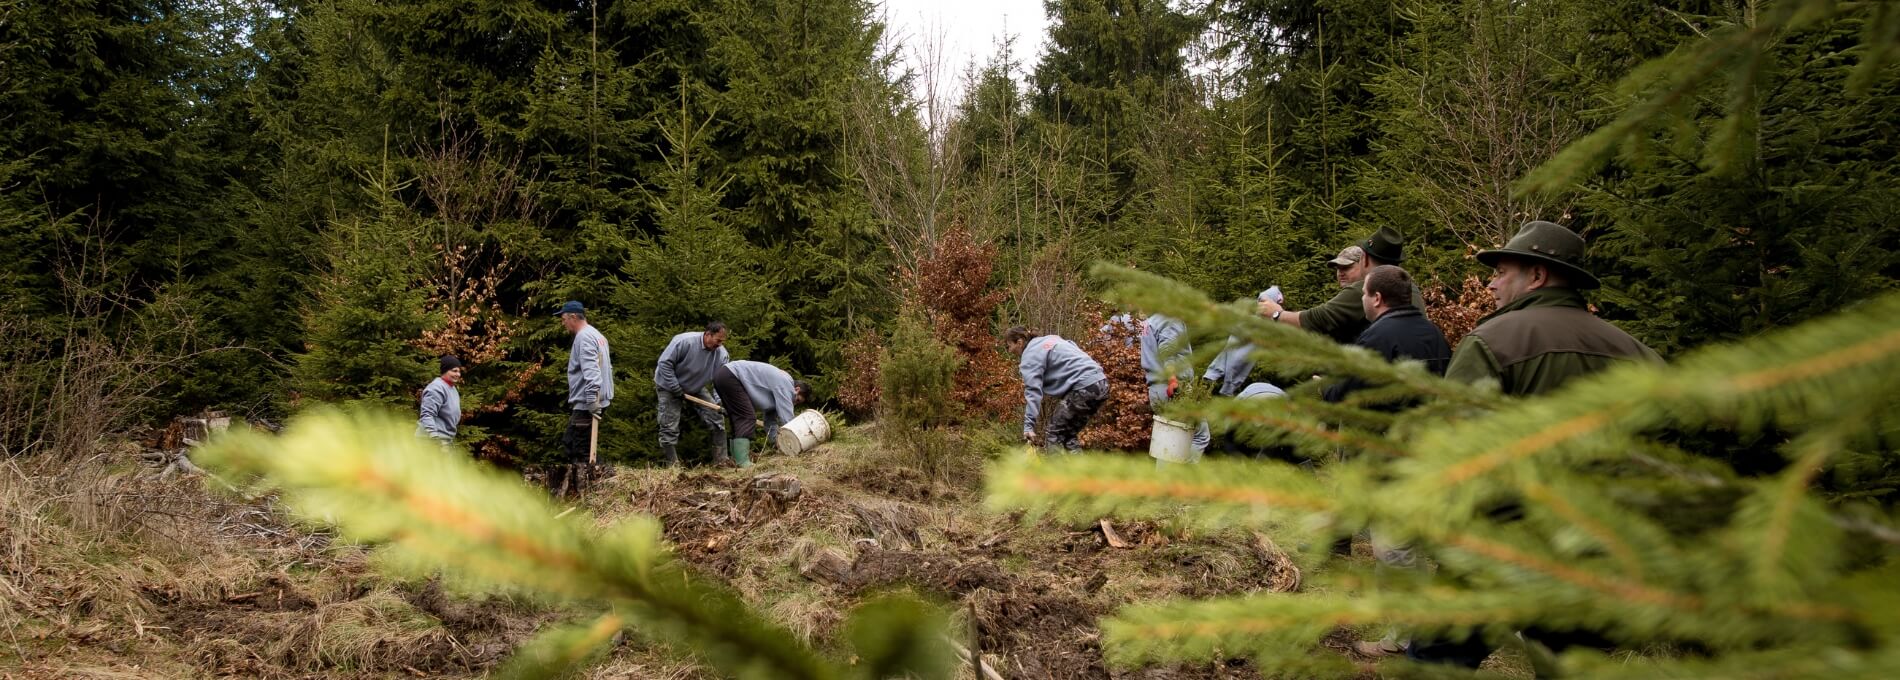 Several people are in a Romanian forest reforesting the forest.